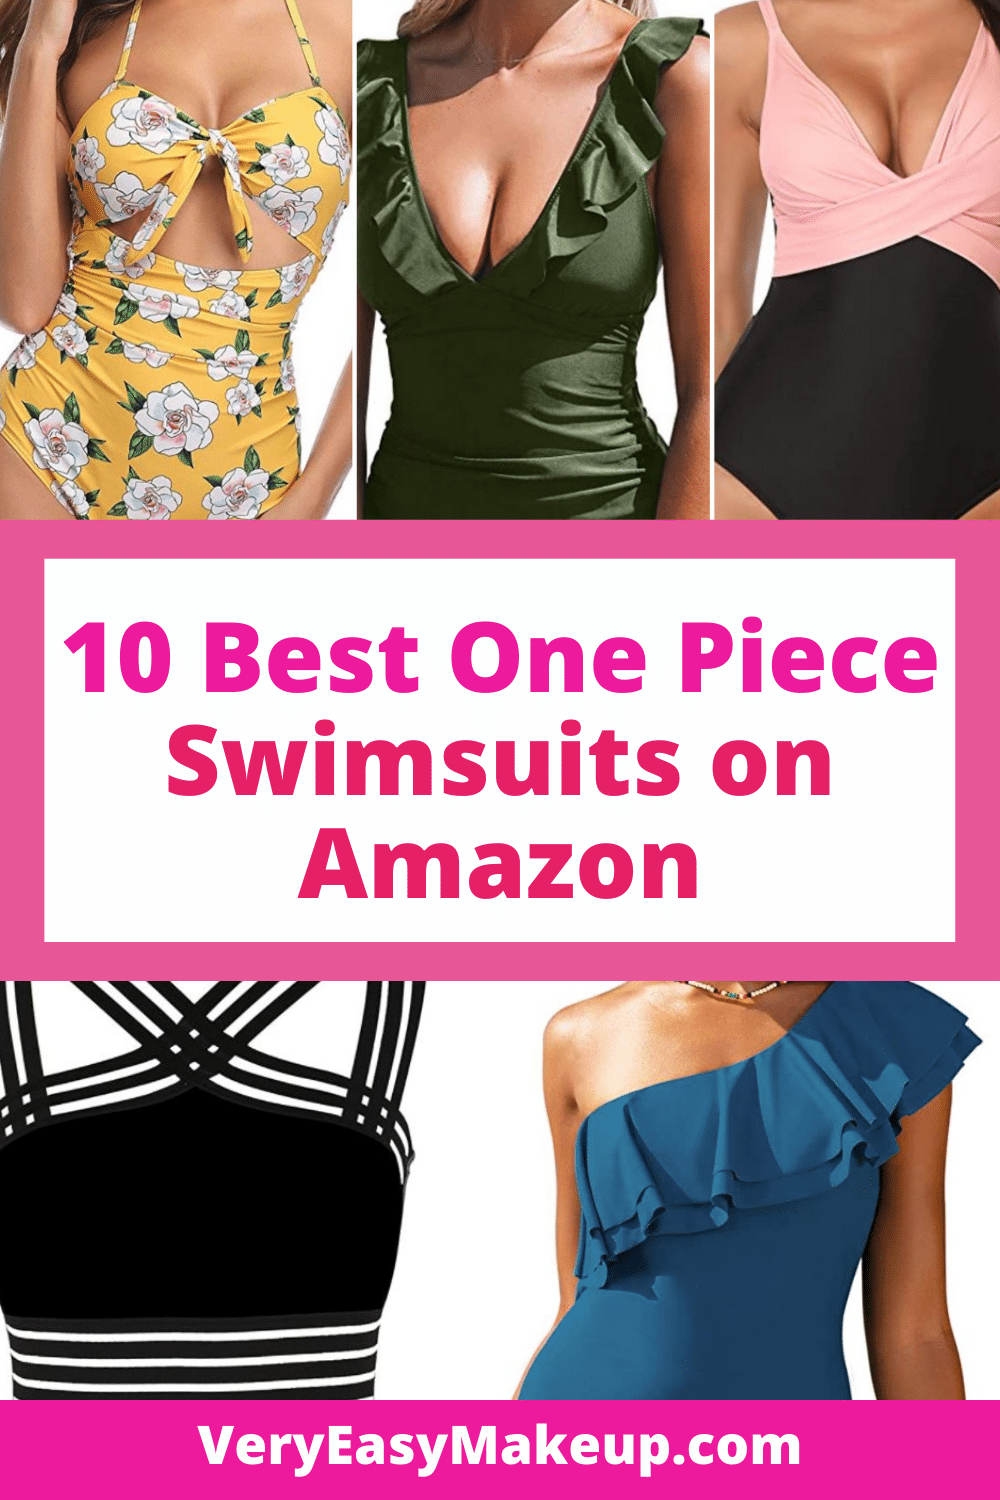 the 10 best one piece swimsuits on Amazon